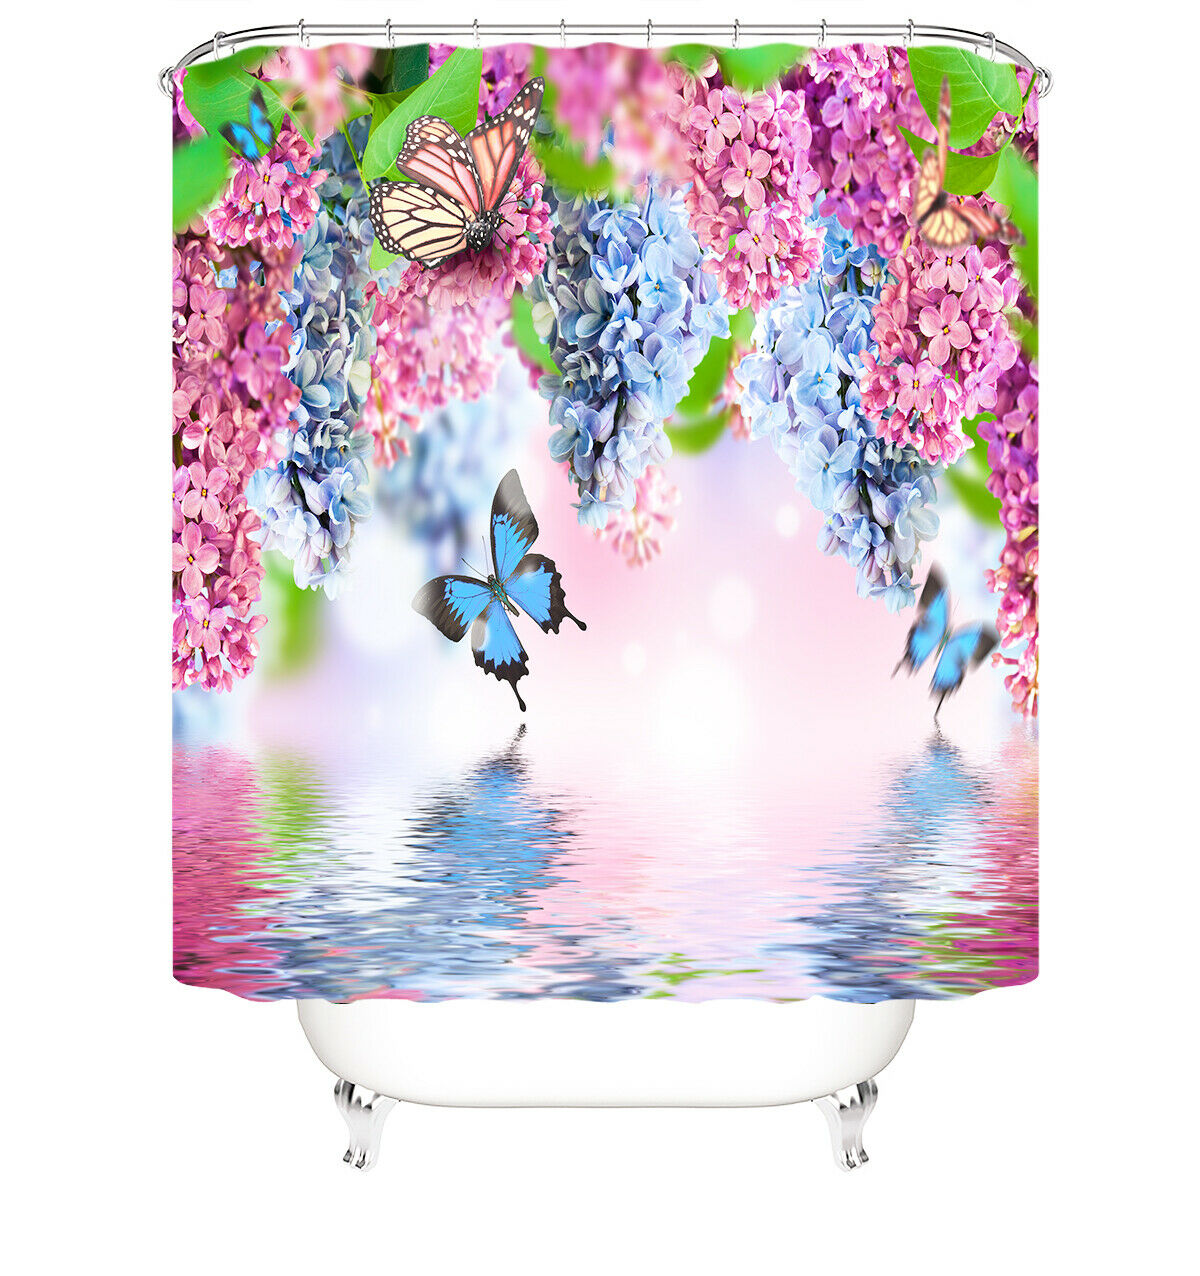 Floral Shower Curtain Bathroom Rug Set Thick Bath Mat Non-Slip Toilet Lid Cover-180×180cm Shower Curtain Only-Free Shipping at meselling99